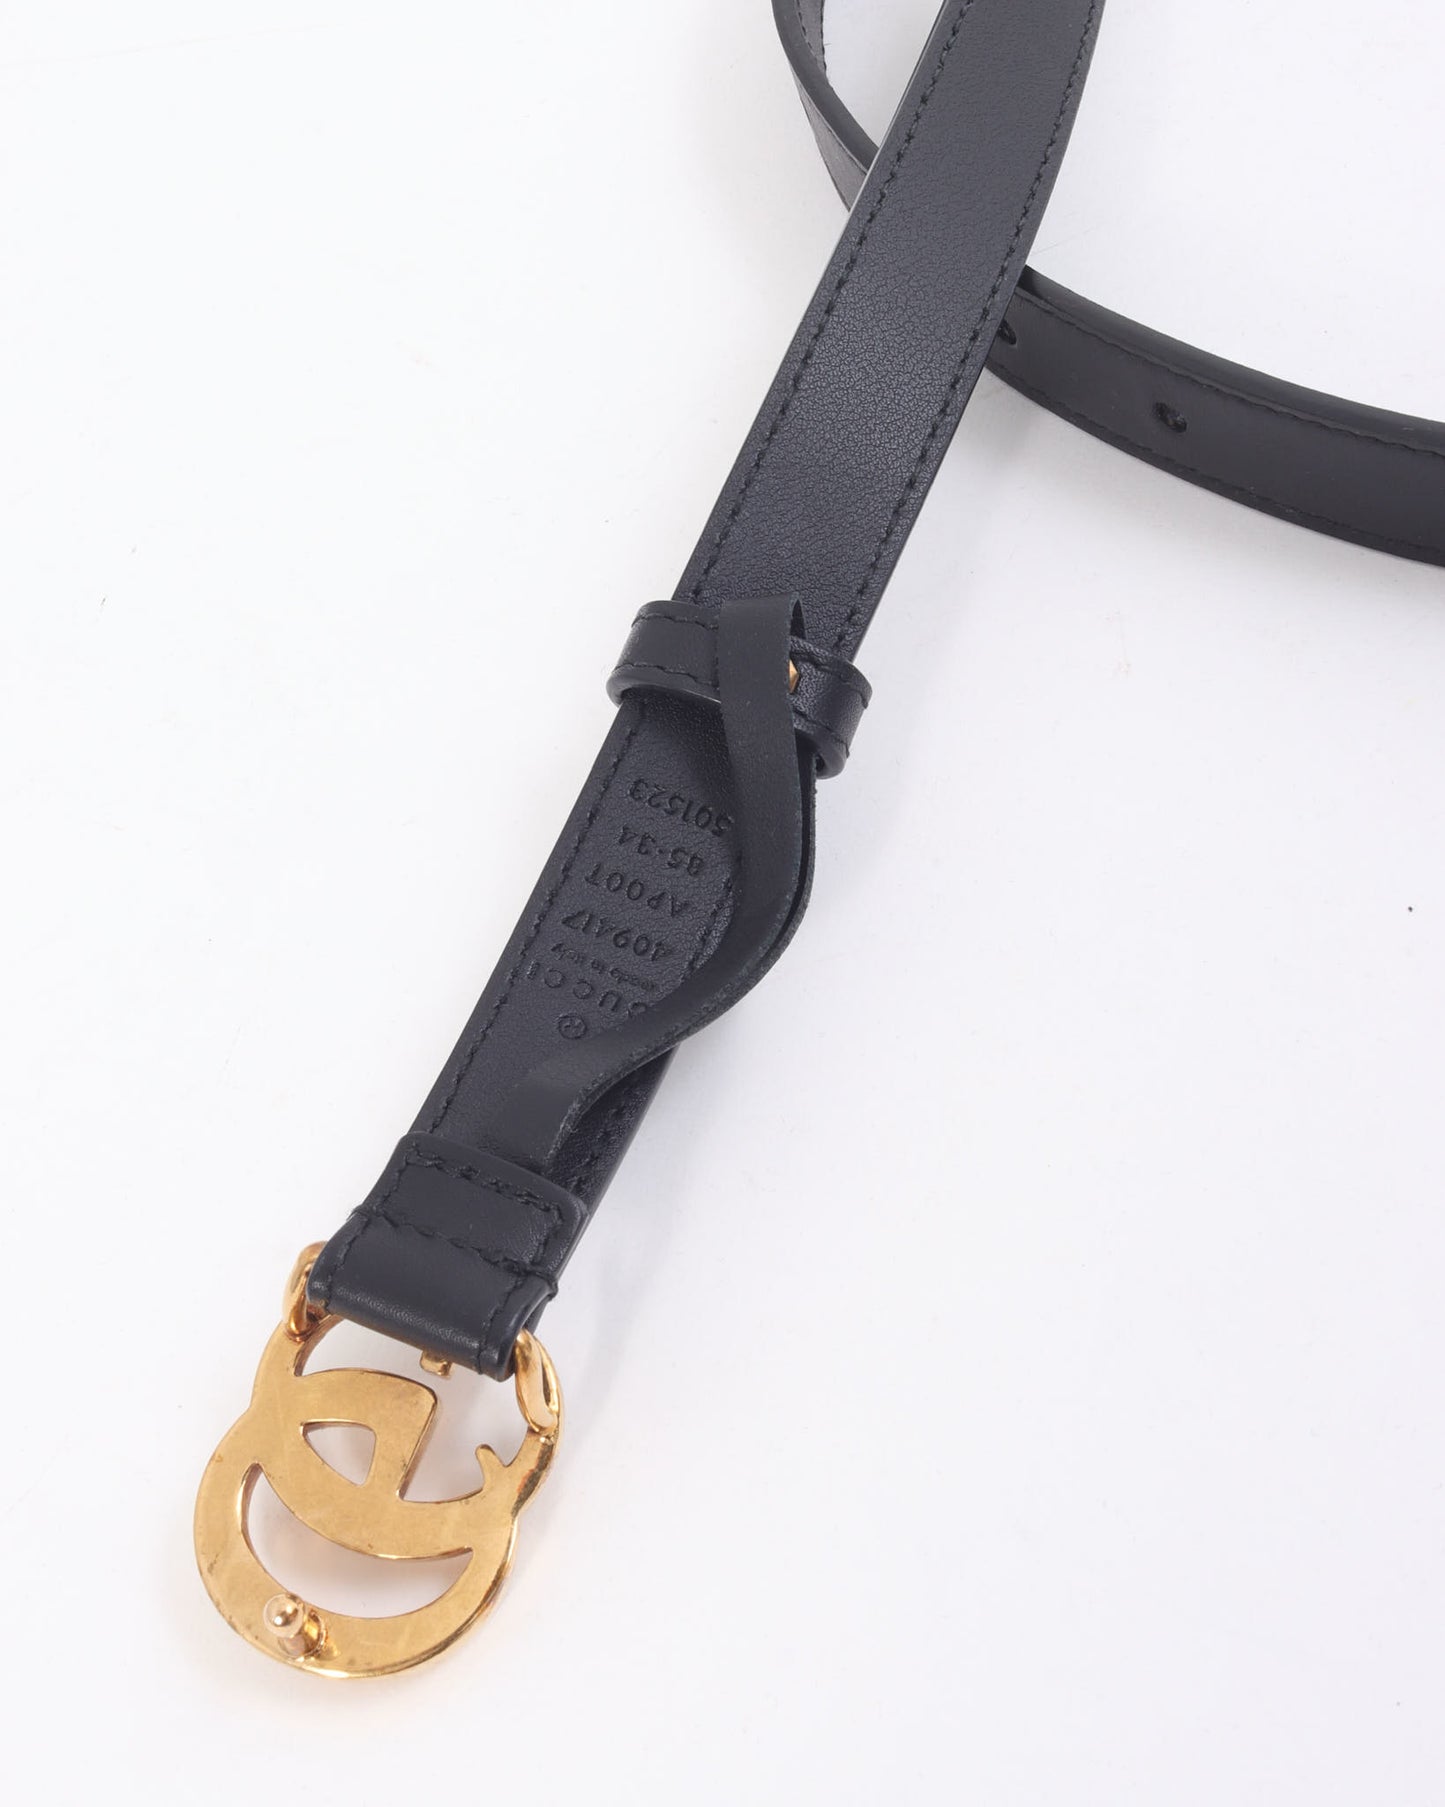 Gucci Black Leather GG Marmont Thin Belt - 85/34